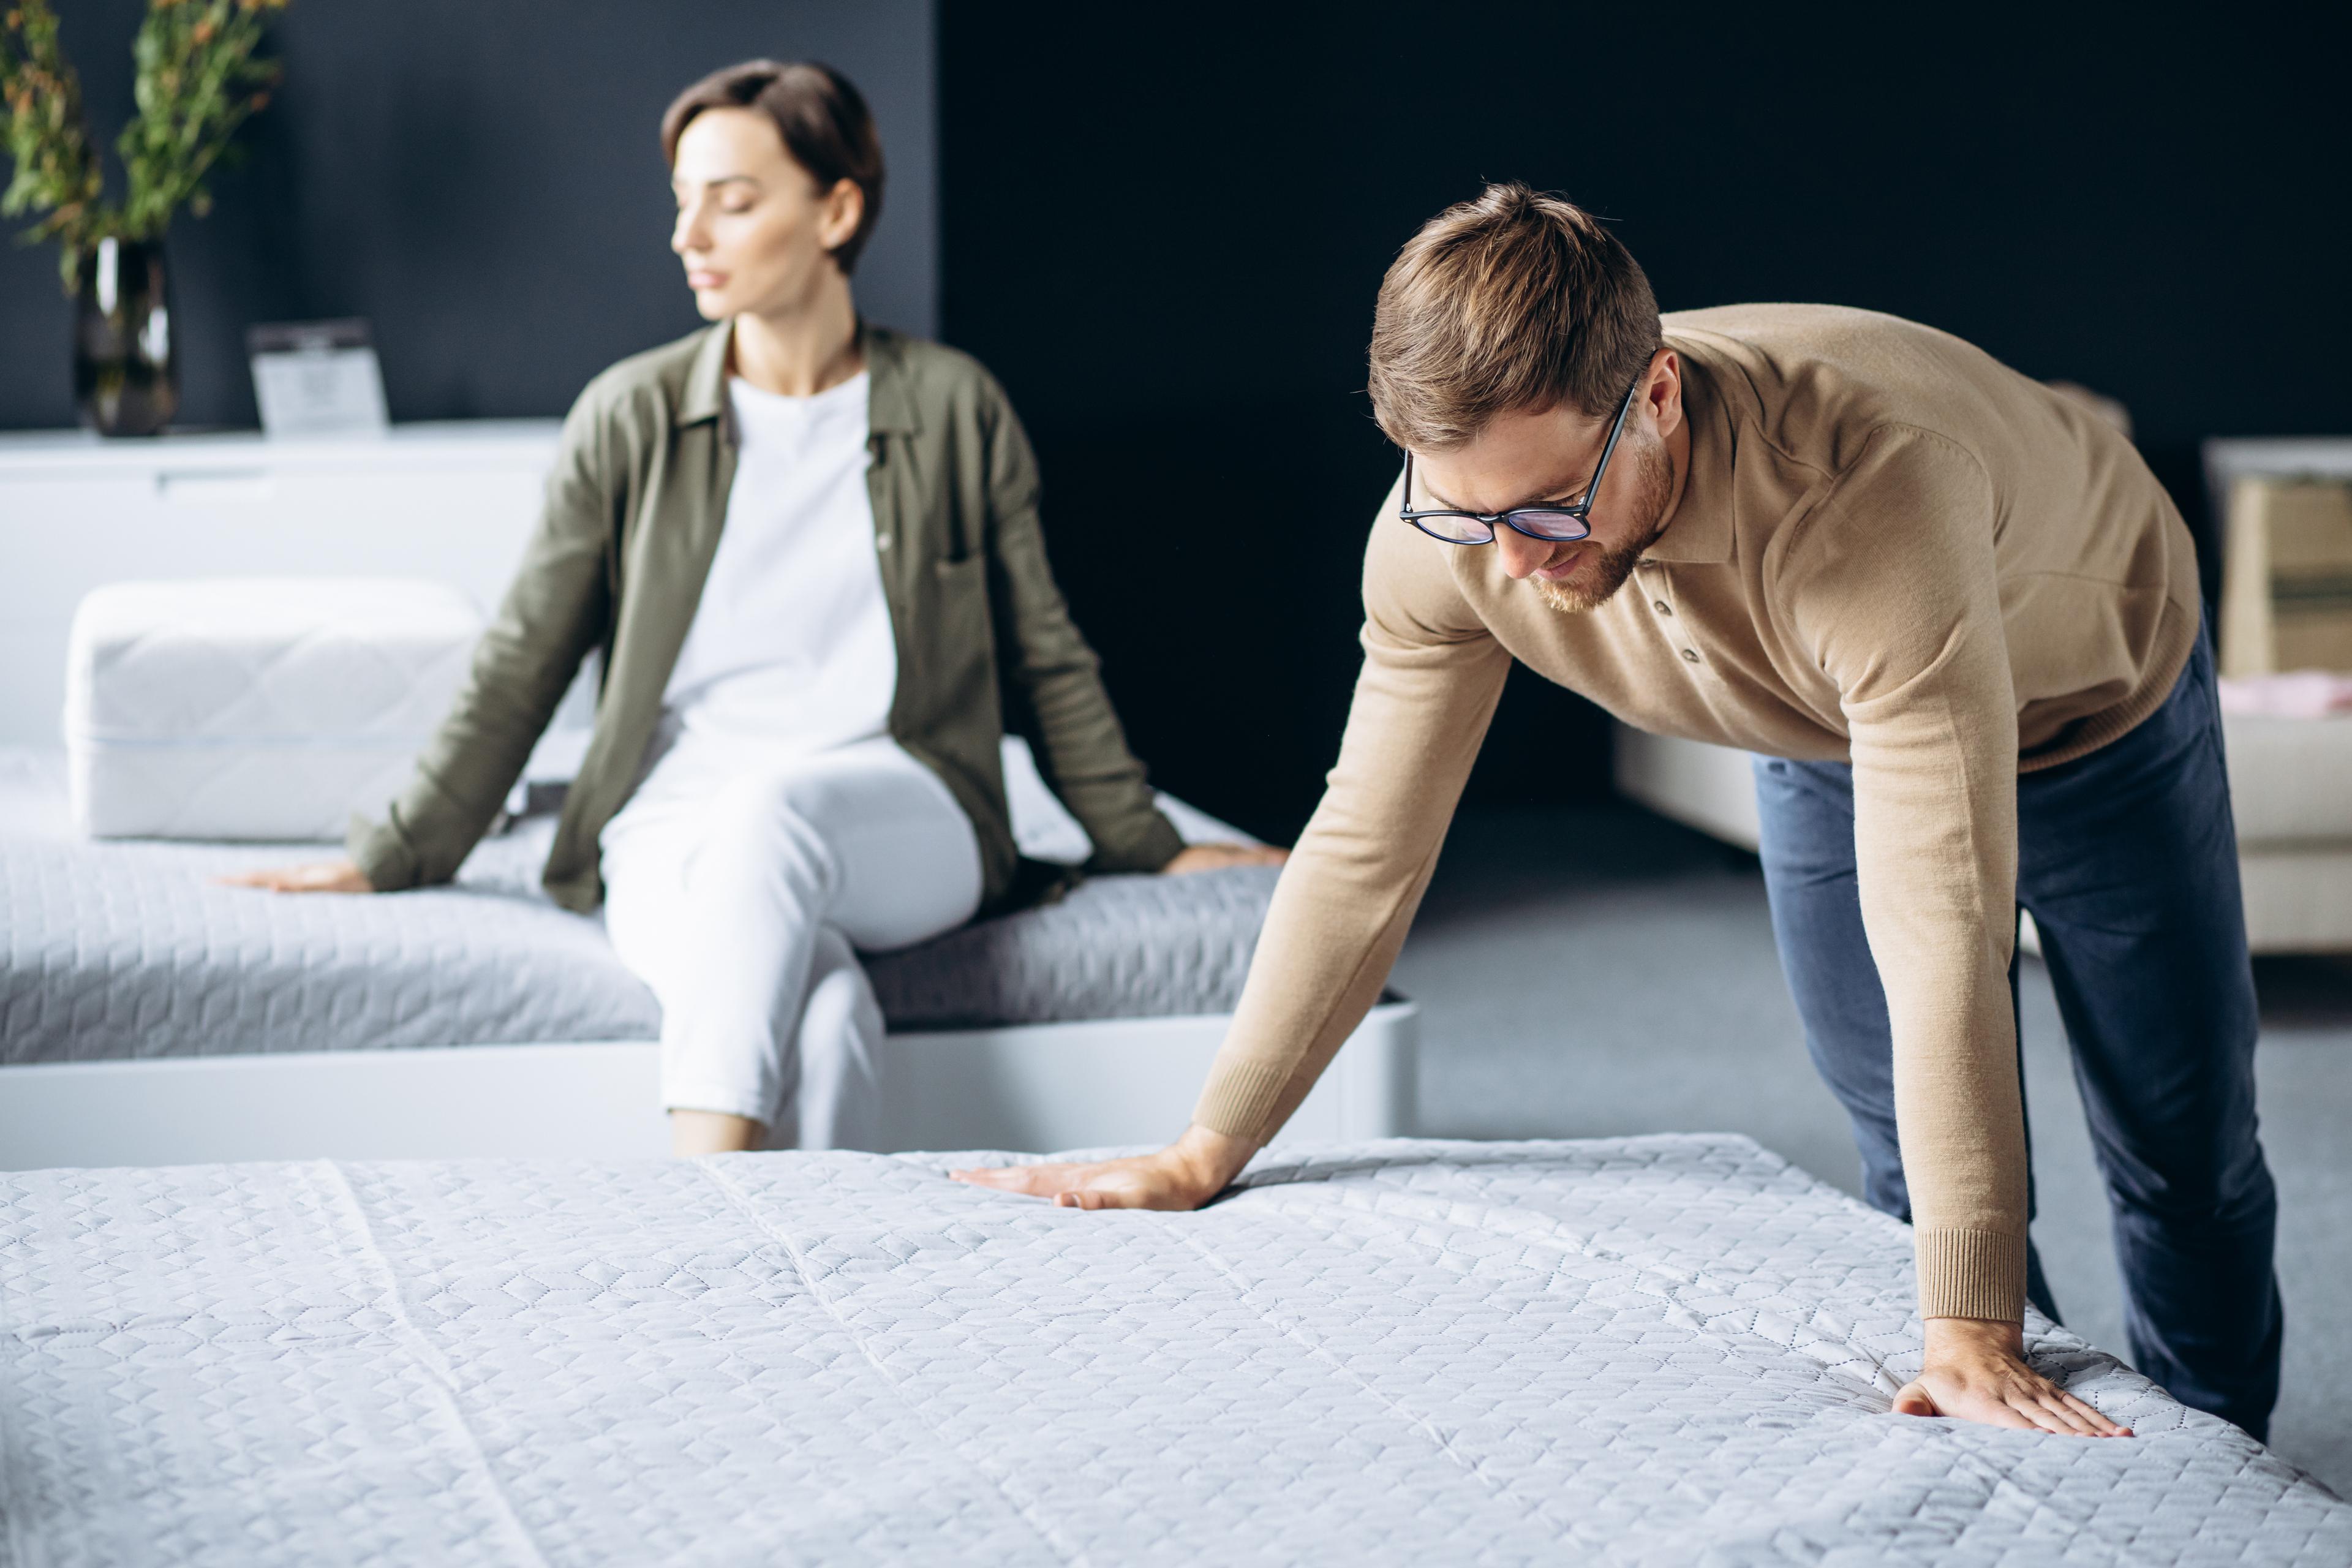 A man and woman test mattresses in a bright store. He leans forward, both hands on the mattress to test the firmness while the woman is sitting on another mattress to test the comfort. They are not engaged, perhaps zoned in their own mattress experiences.